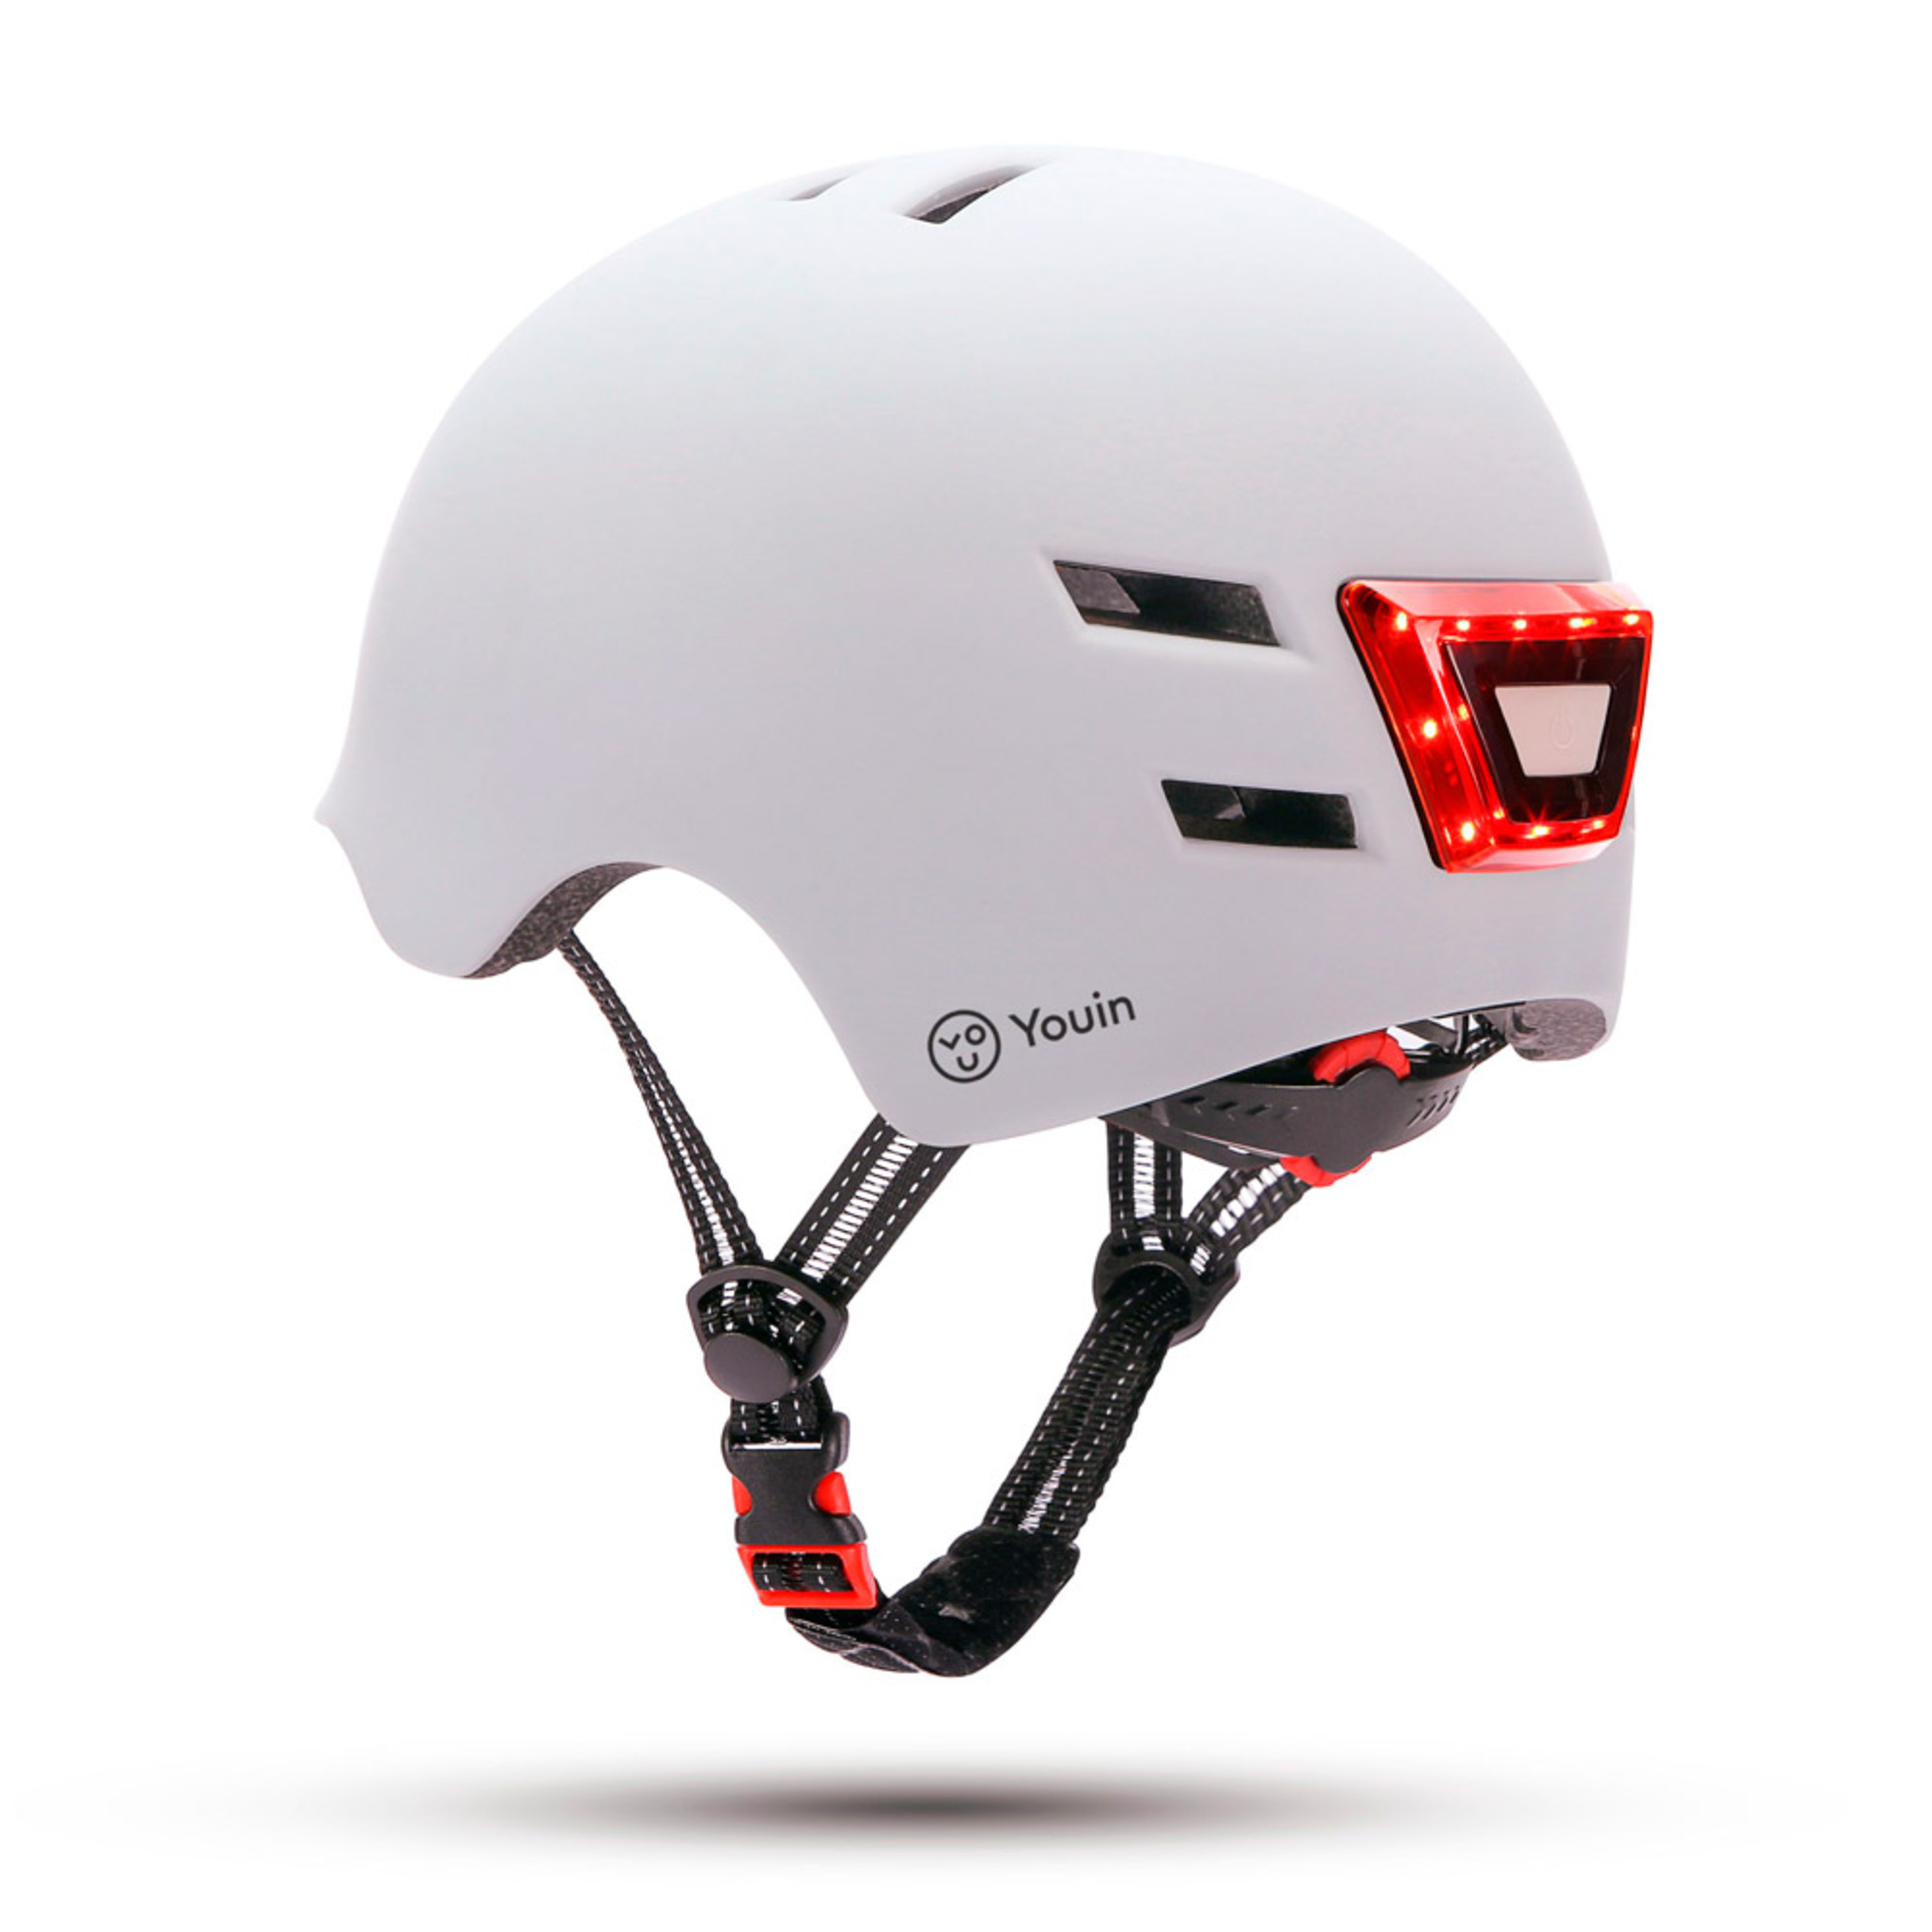 Casco Youin Con Luces Led Frontal Y Trasera Ajustable - Led Frontal Y Trasera Y Ajustable.  MKP